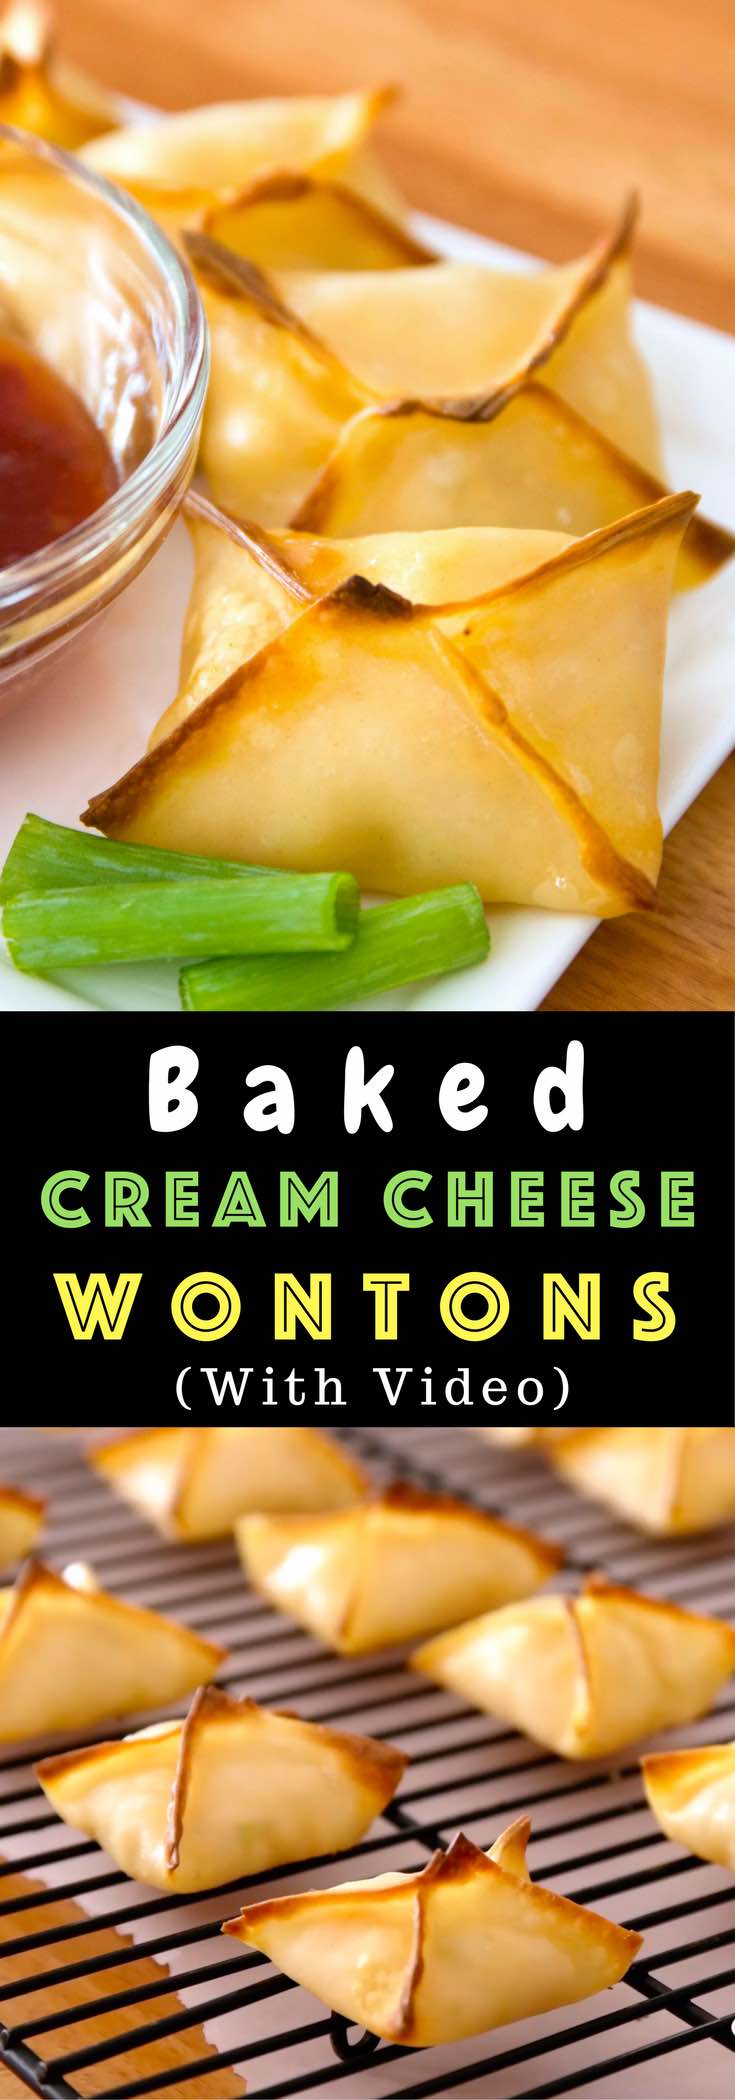 These Baked Cream Cheese Wontons have a delicious shrimp filling and a crispy exterior that melts in your mouth. An easy appetizer to make for a party! Video recipe. #wontons